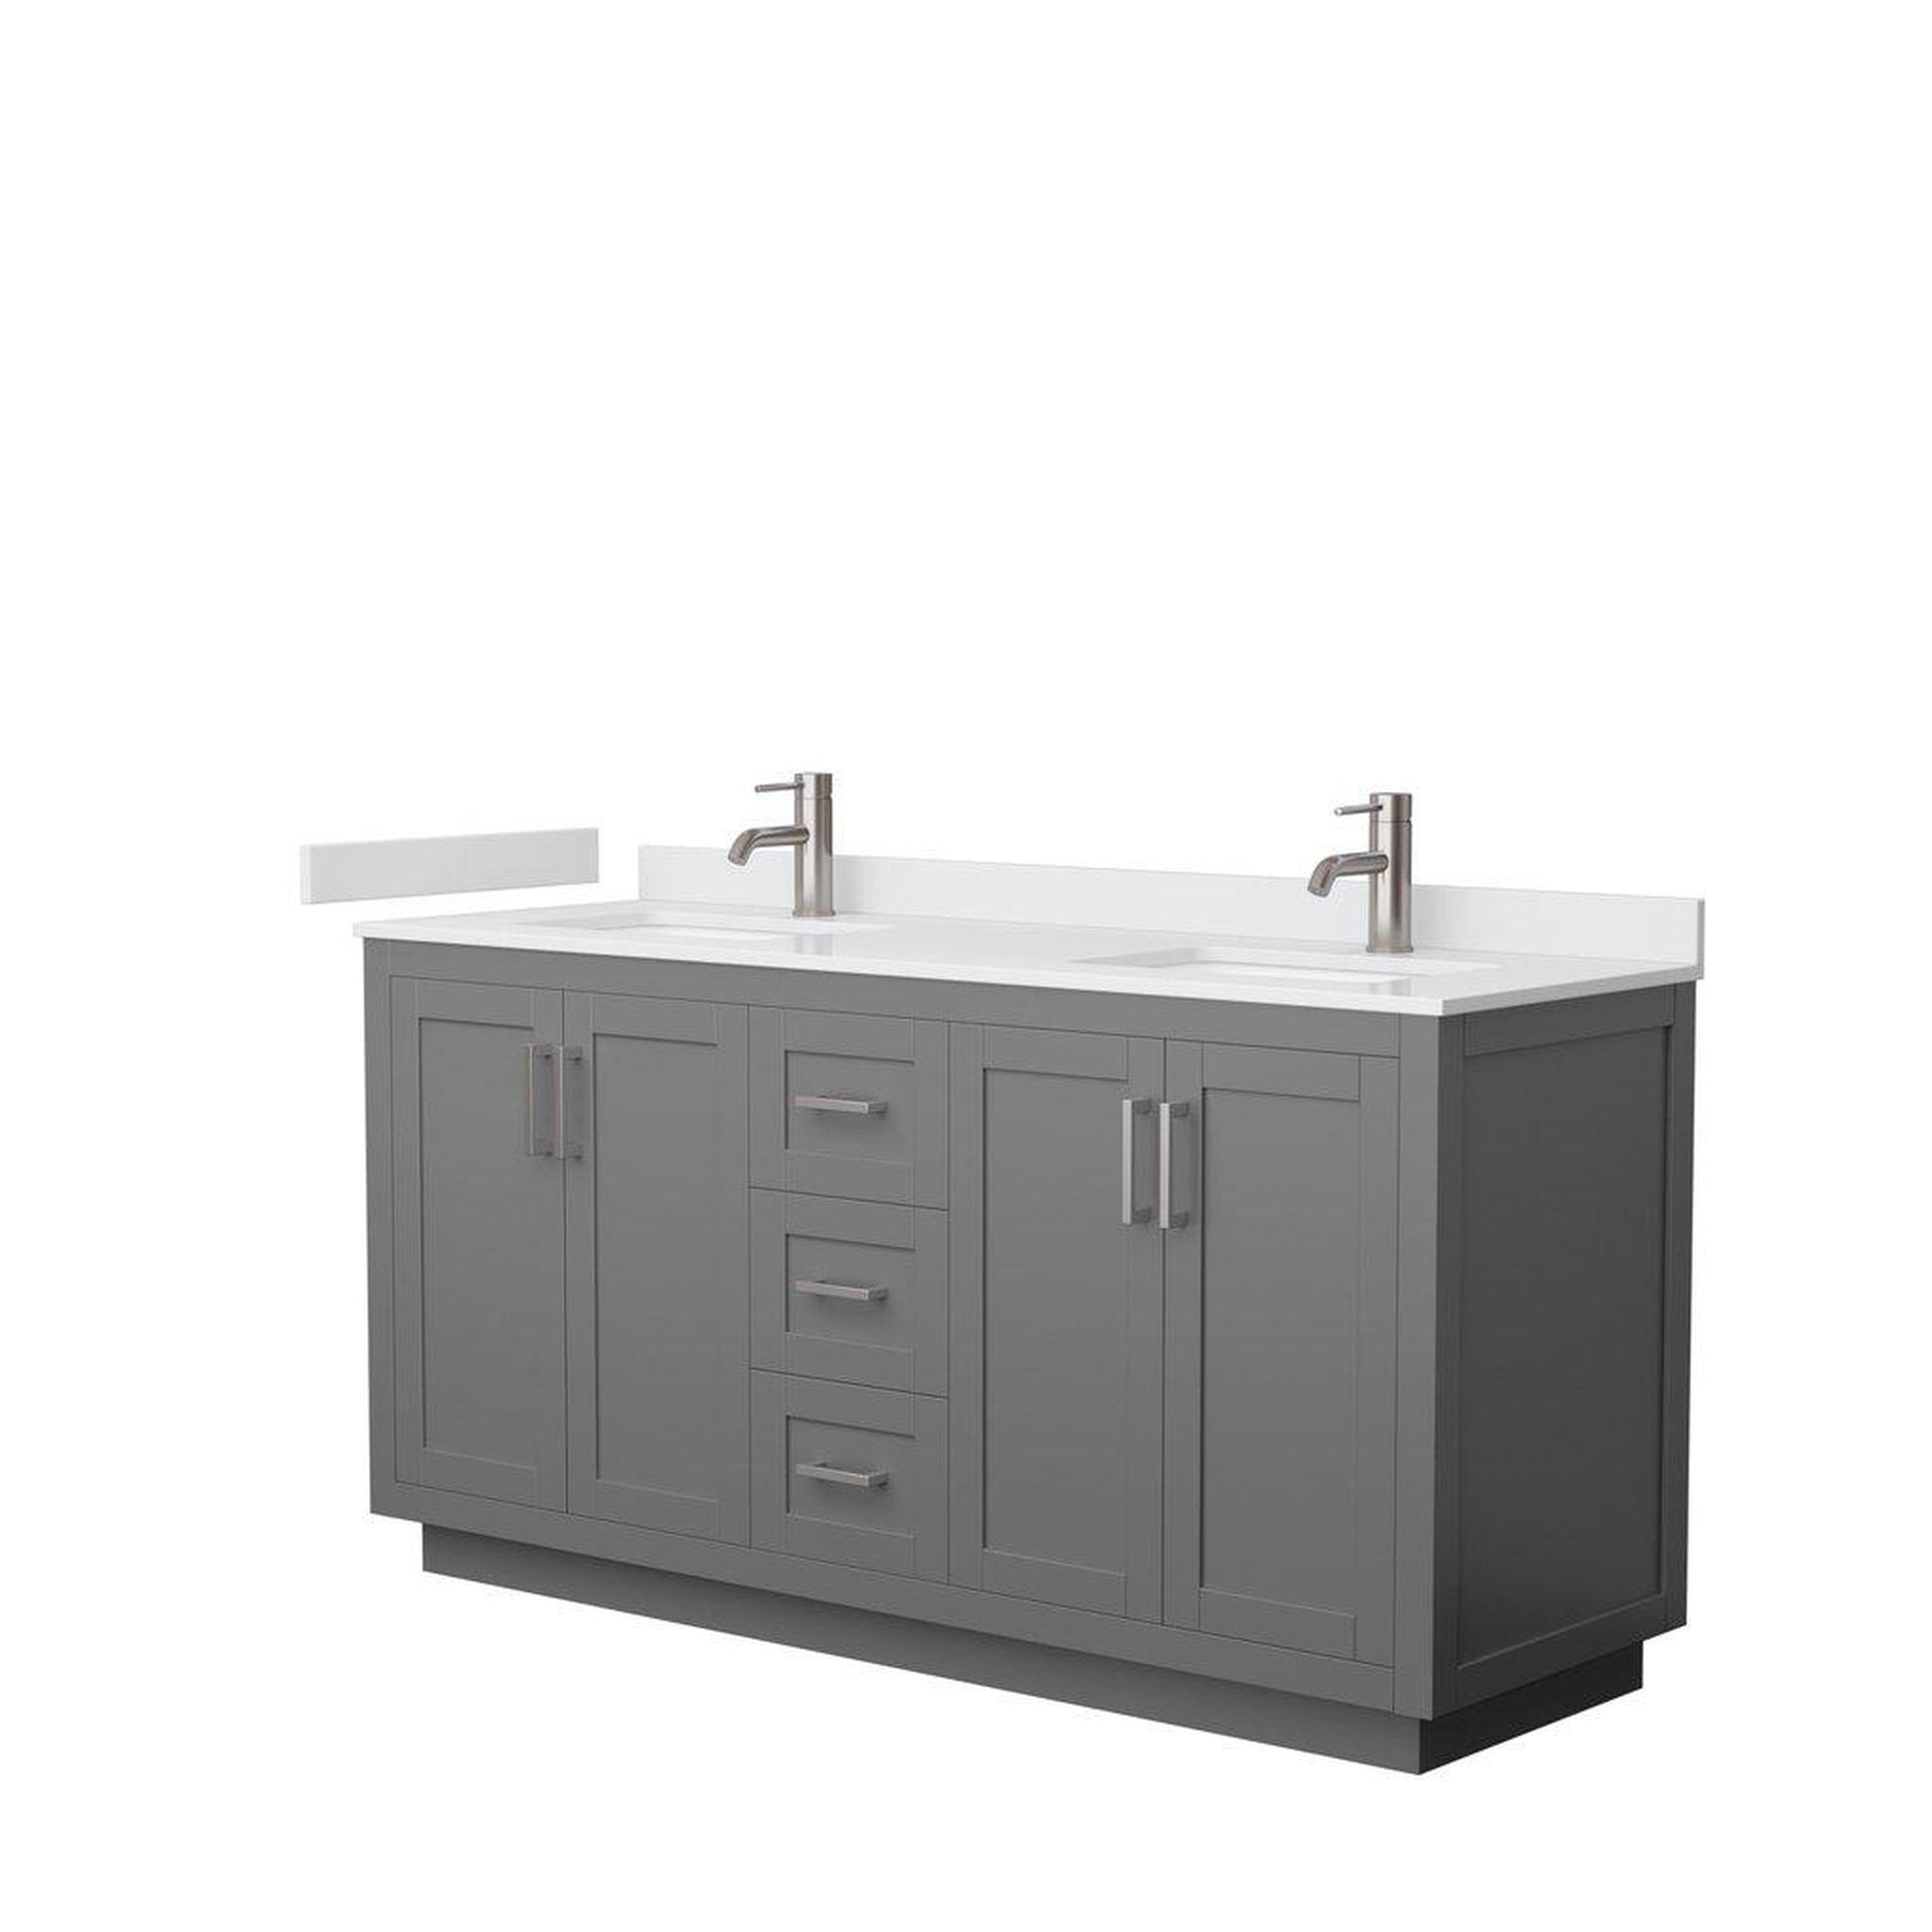 Wyndham Collection Miranda 66" Double Bathroom Dark Gray Vanity Set With White Cultured Marble Countertop, Undermount Square Sink, And Brushed Nickel Trim